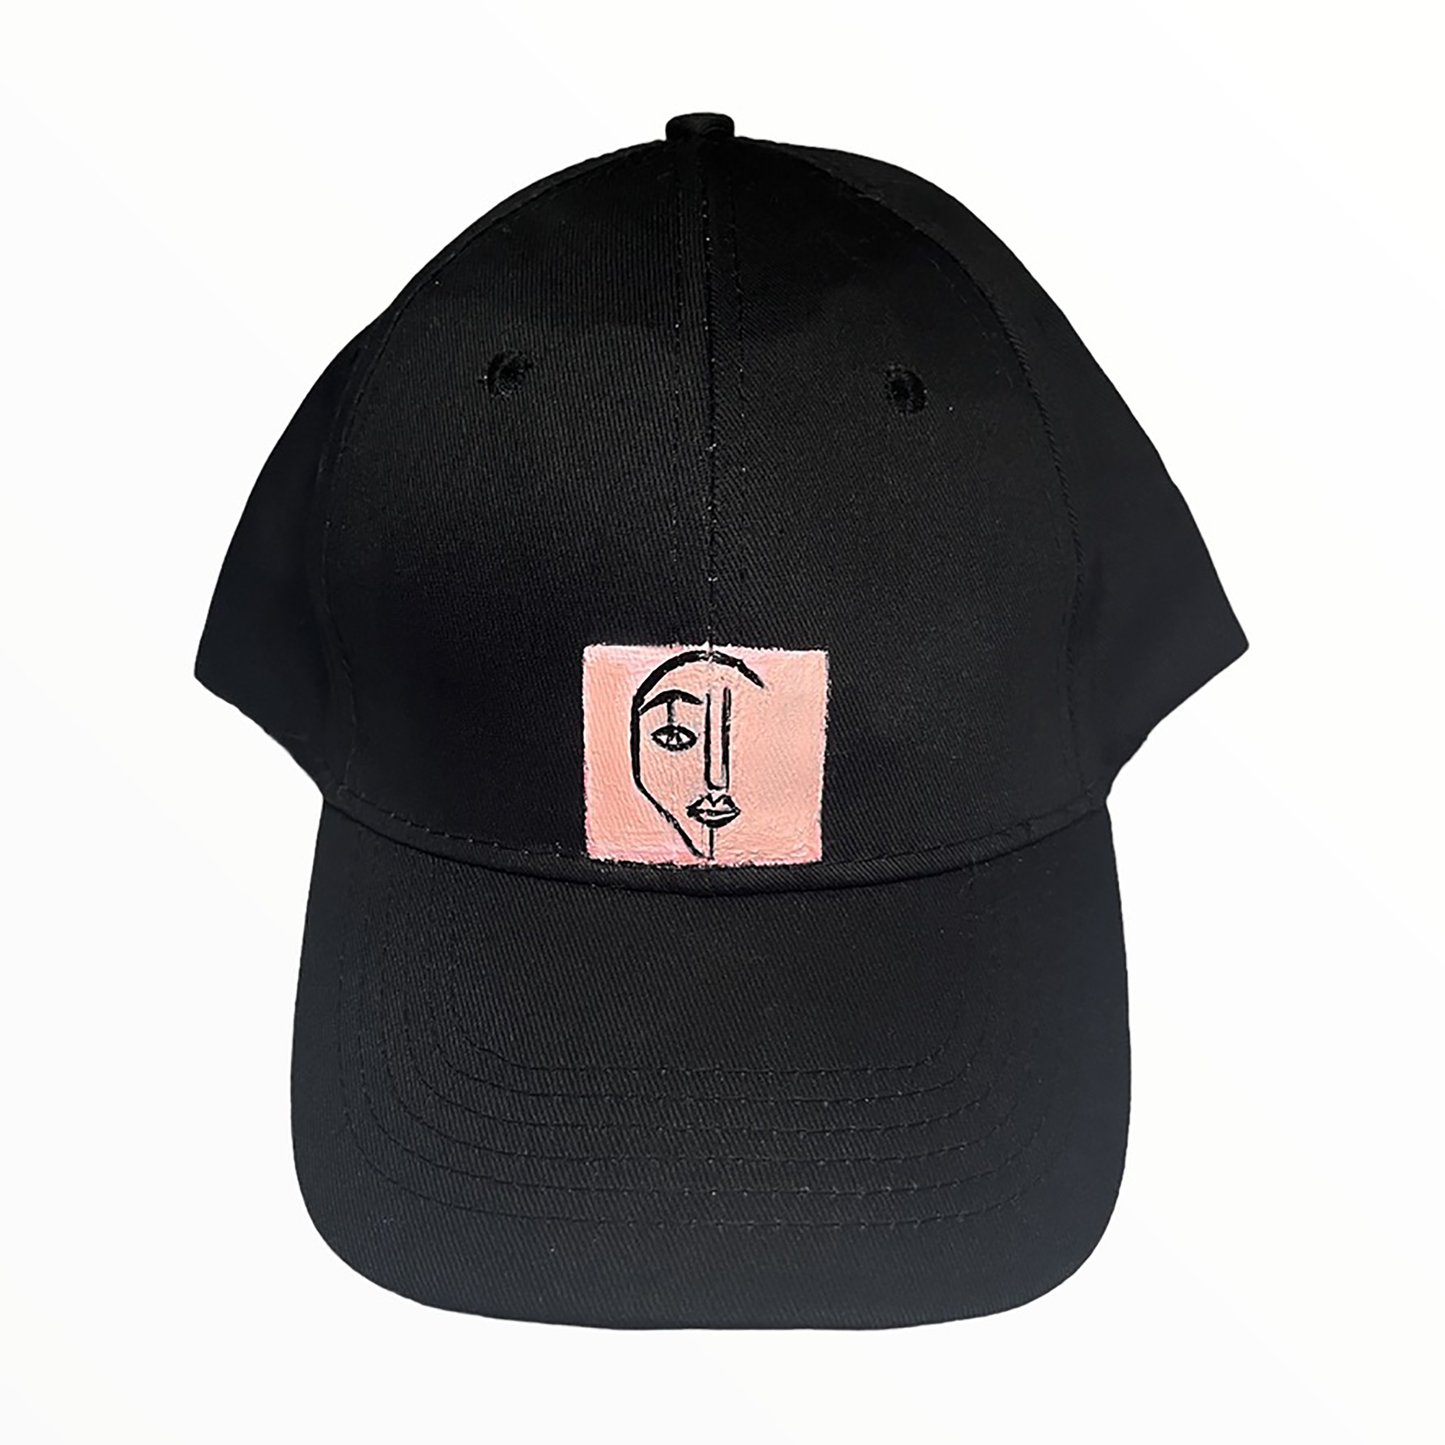 TNF "Signature Face" -  Black Baseball Cap - Hand Painted by Temporarily Not Famous